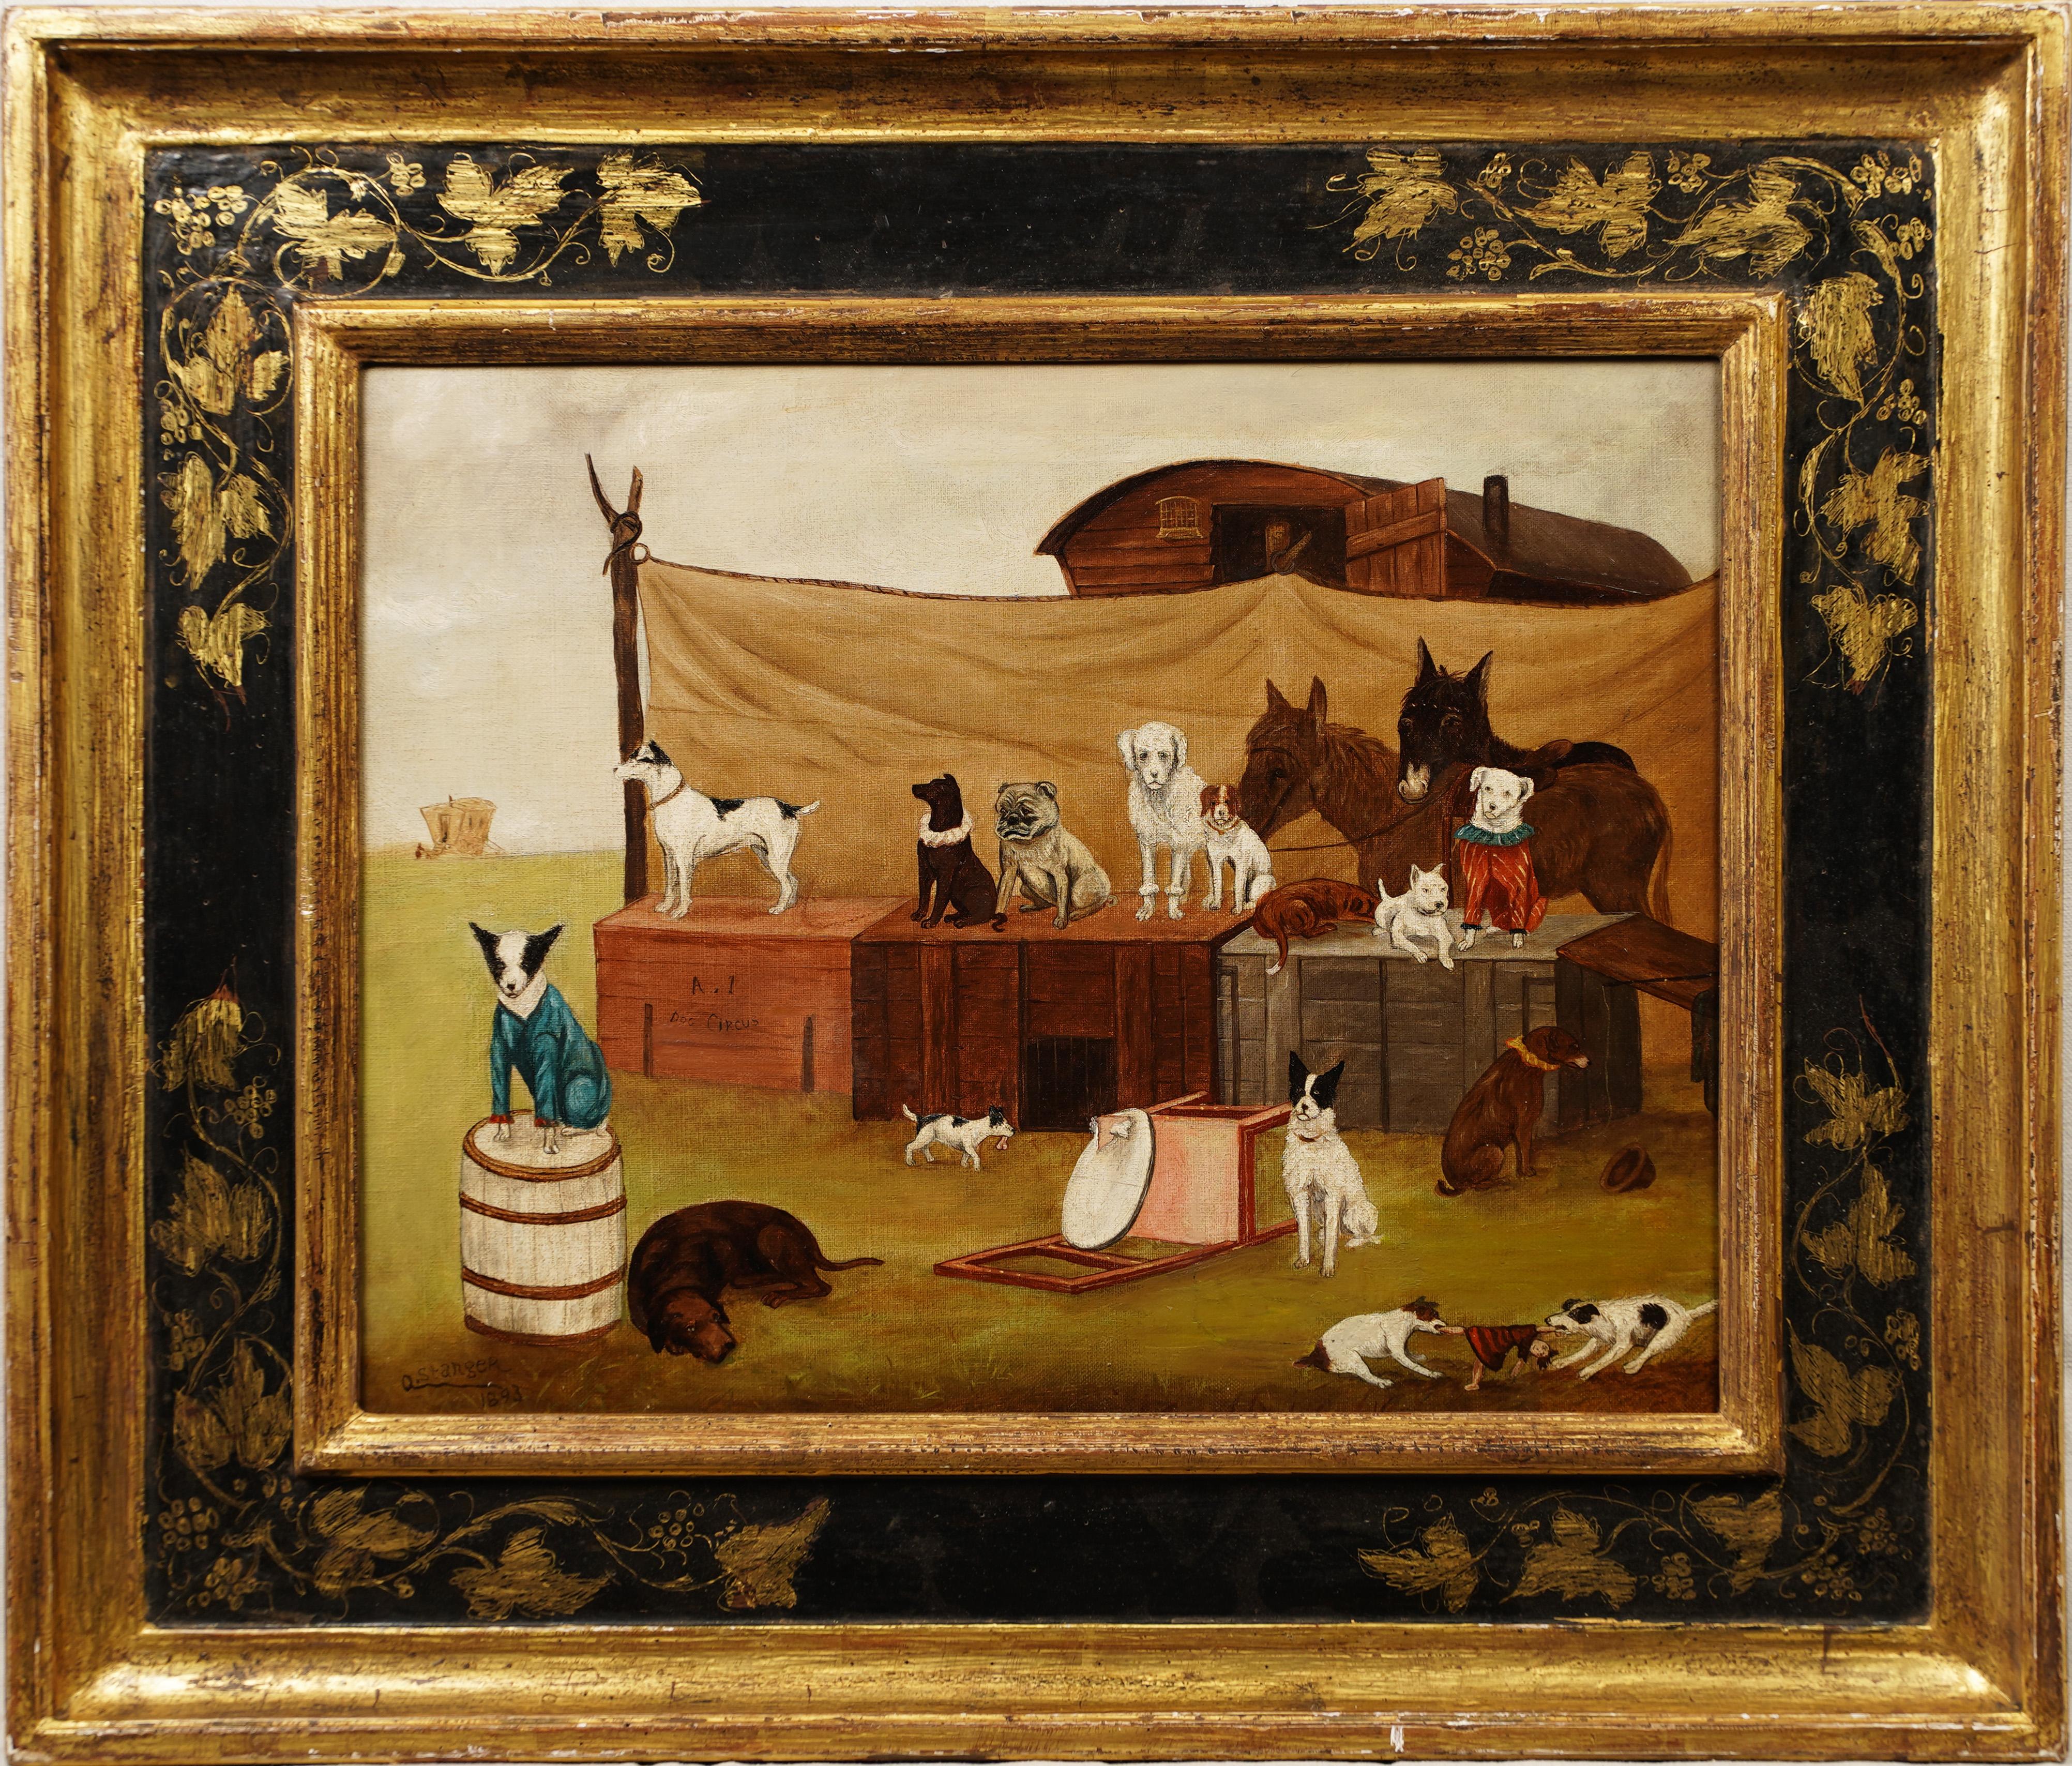 Important Antique American Folk Art Dog Circus Animal Portrait Framed Painting - Brown Landscape Painting by Unknown